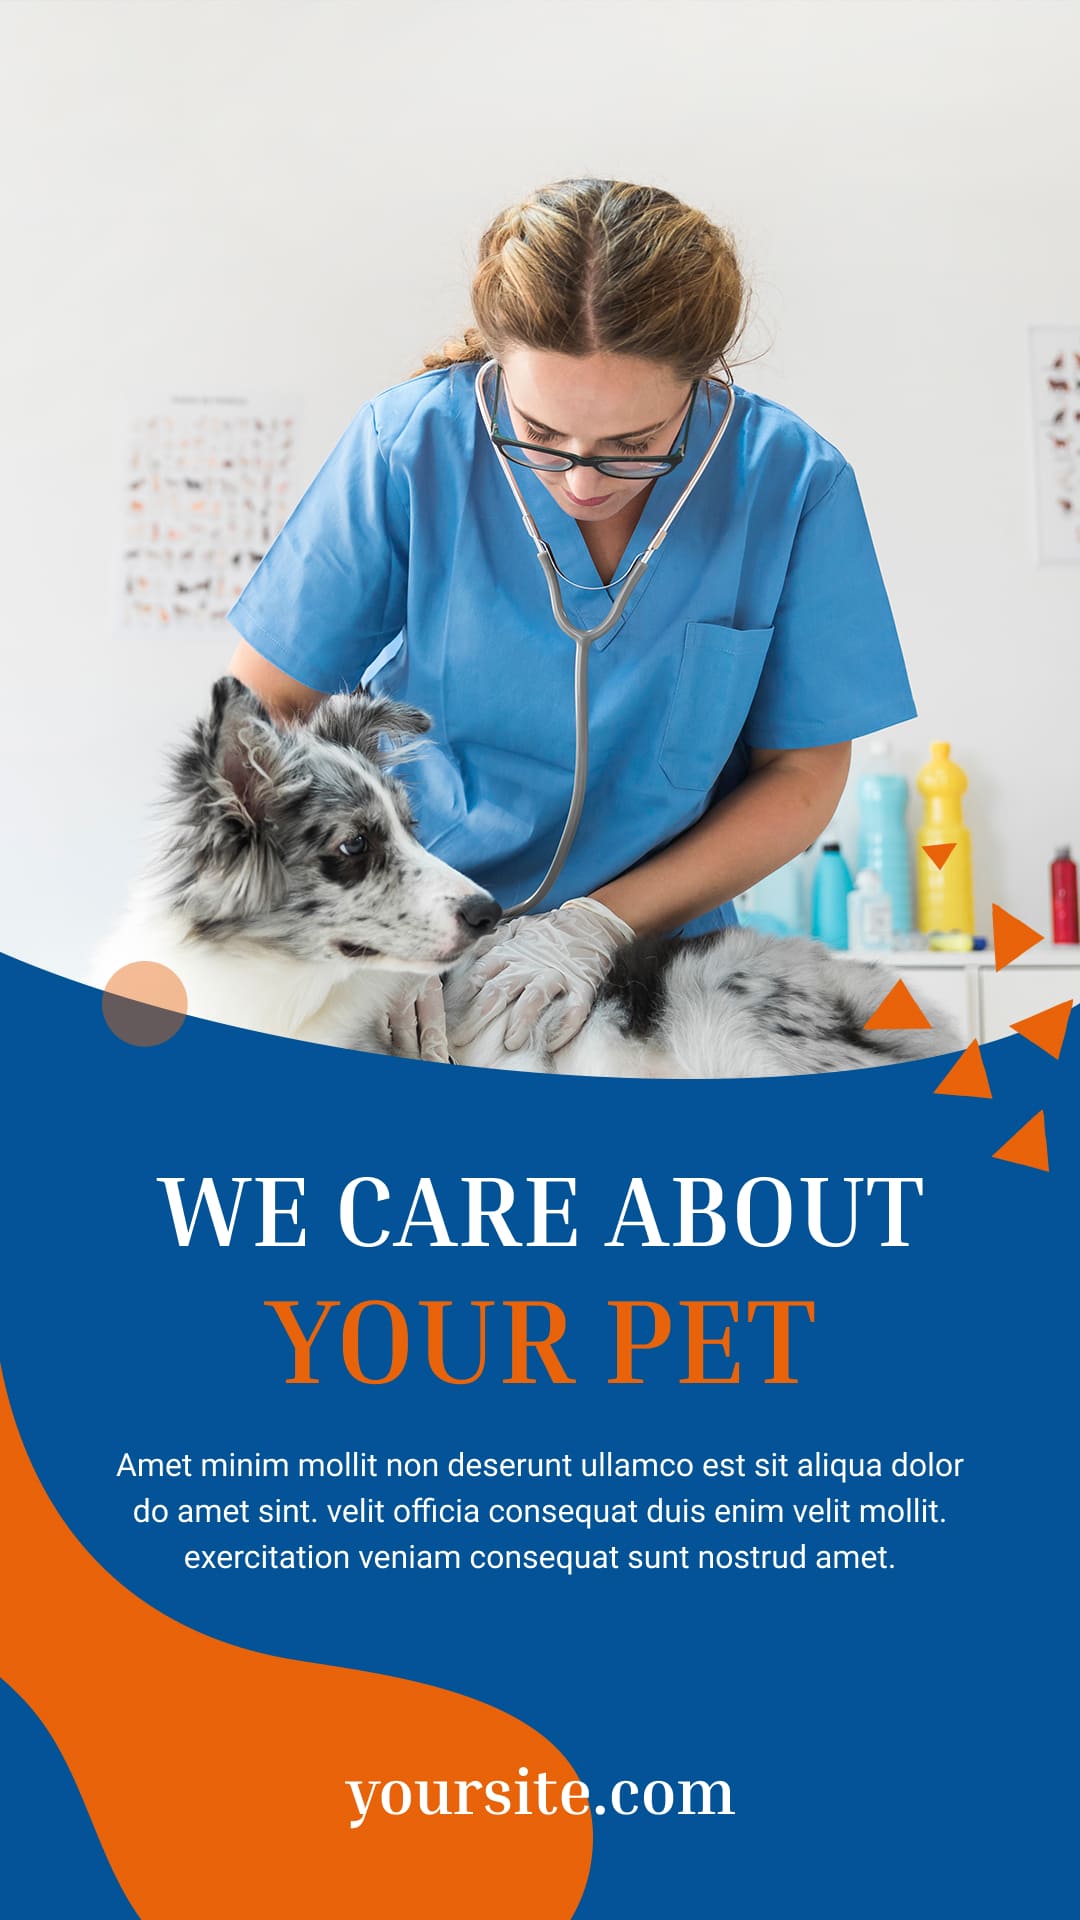 Cool vivid template for dog care.